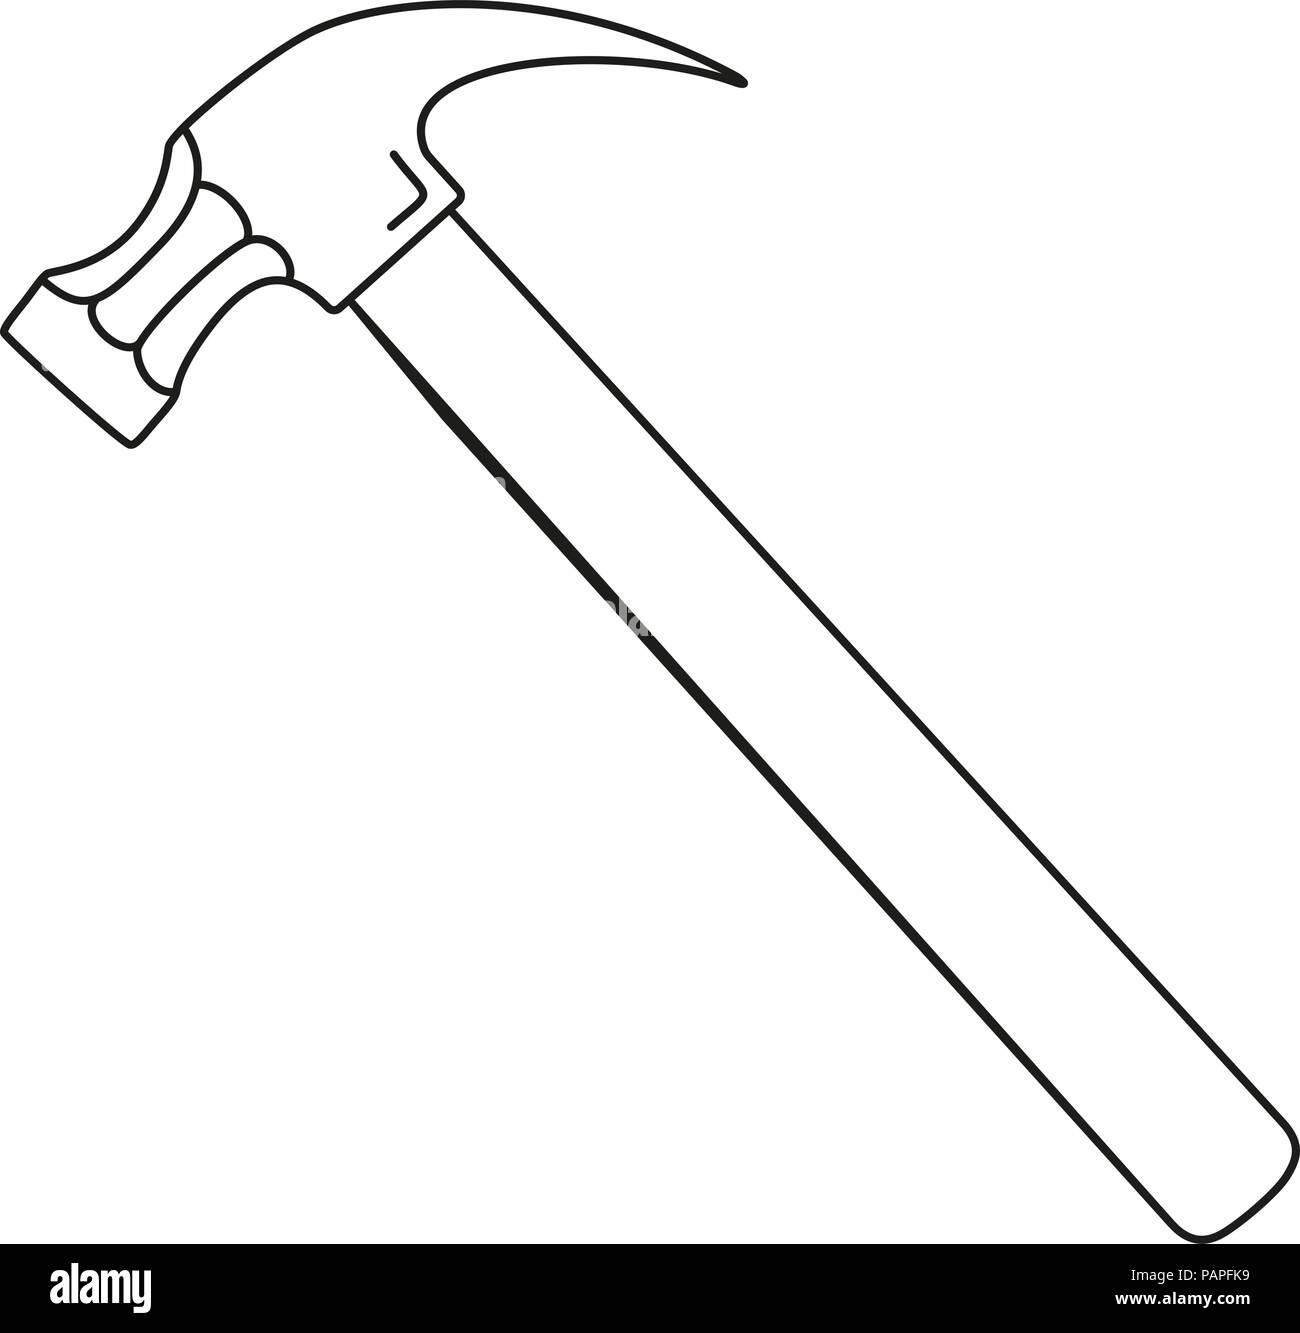 Hammer Drawing Illustration Stock Illustration  Download Image Now  Art  Art And Craft Black And White  iStock